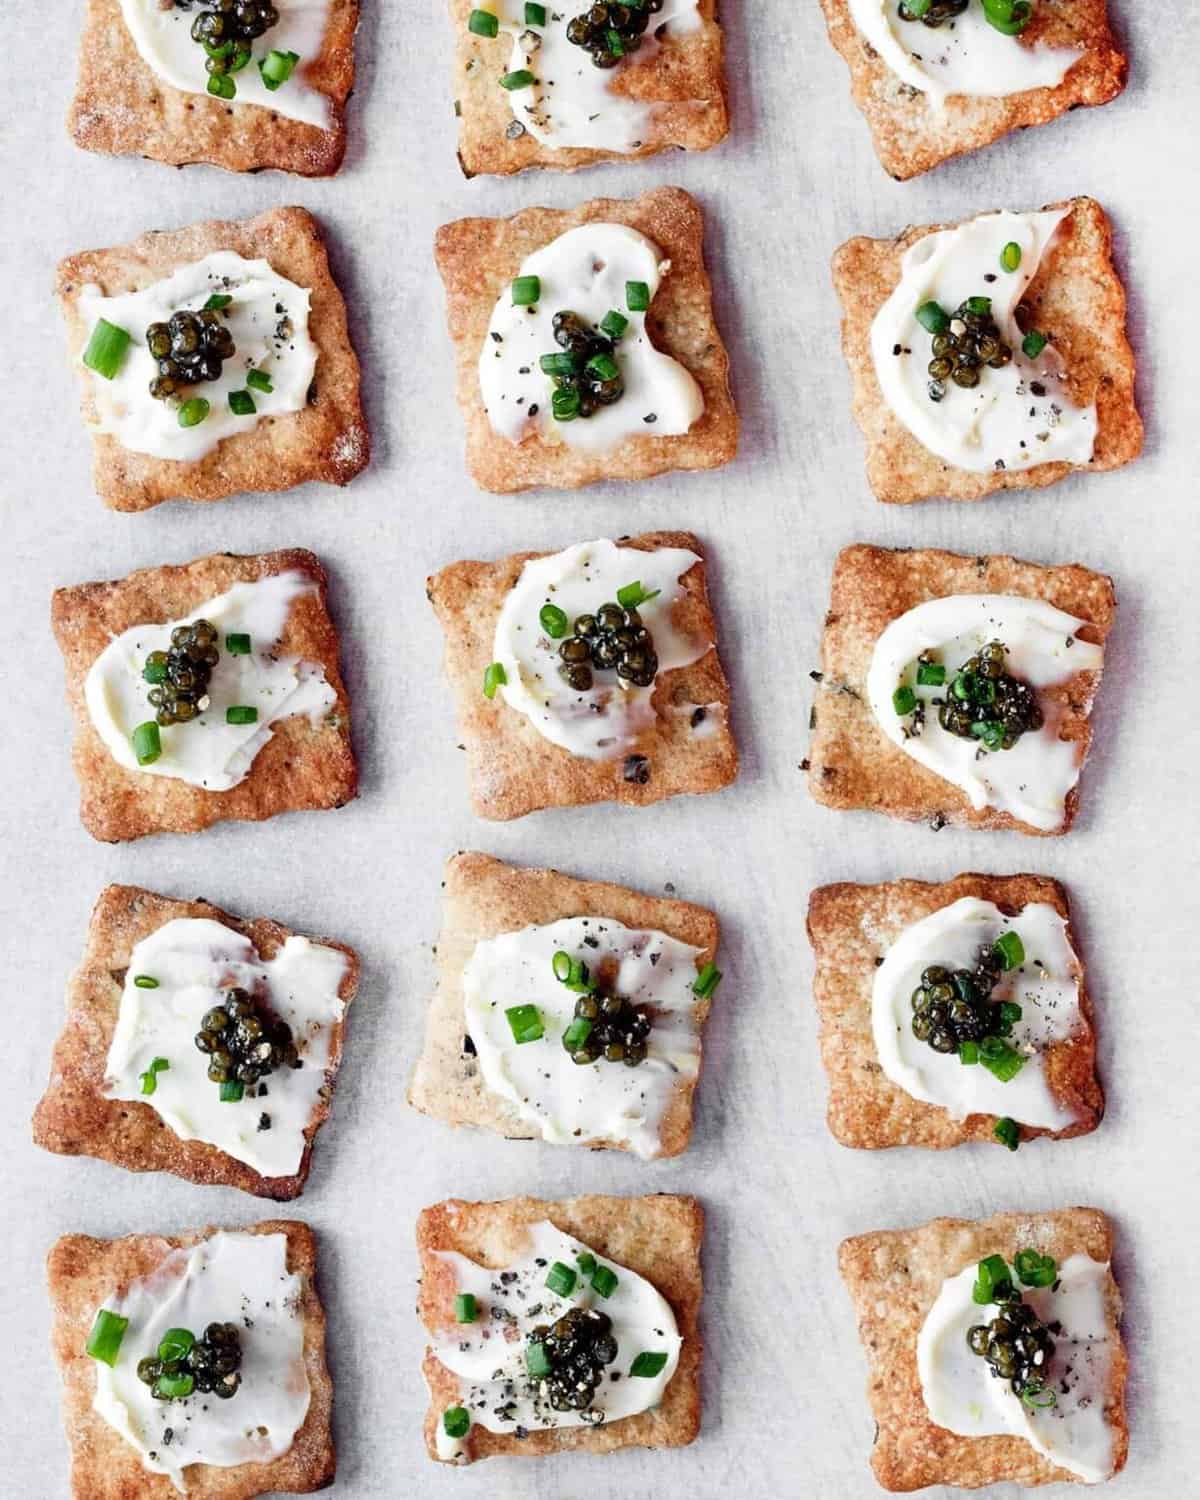 Homemade Herb Crackers with Caviar and Mascarpone | Last Ingredient